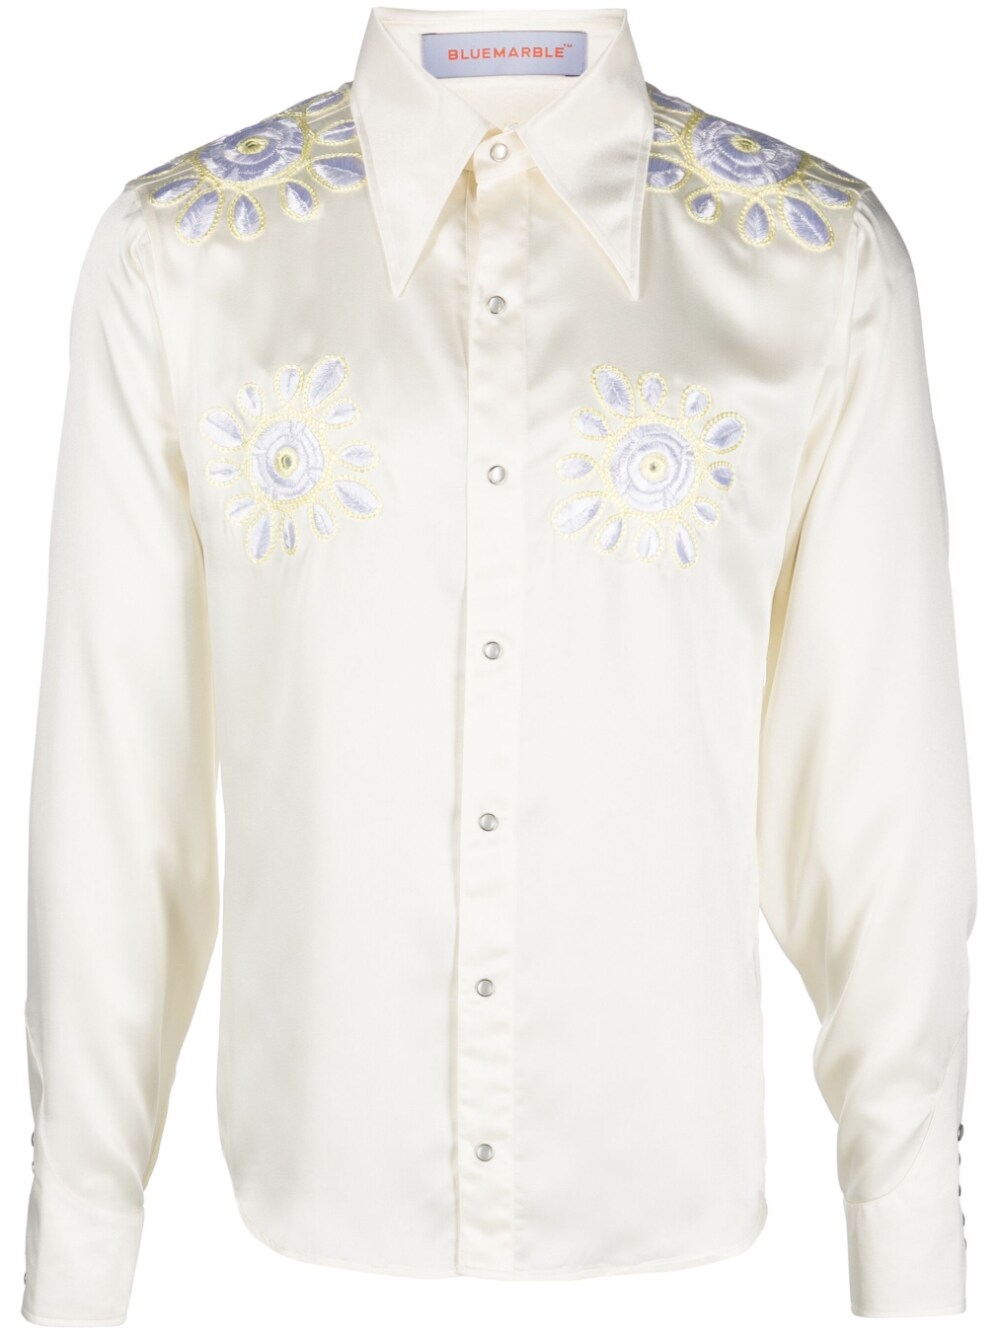 Bluemarble BLUEMARBLE- Embroidered Flowers Shirt